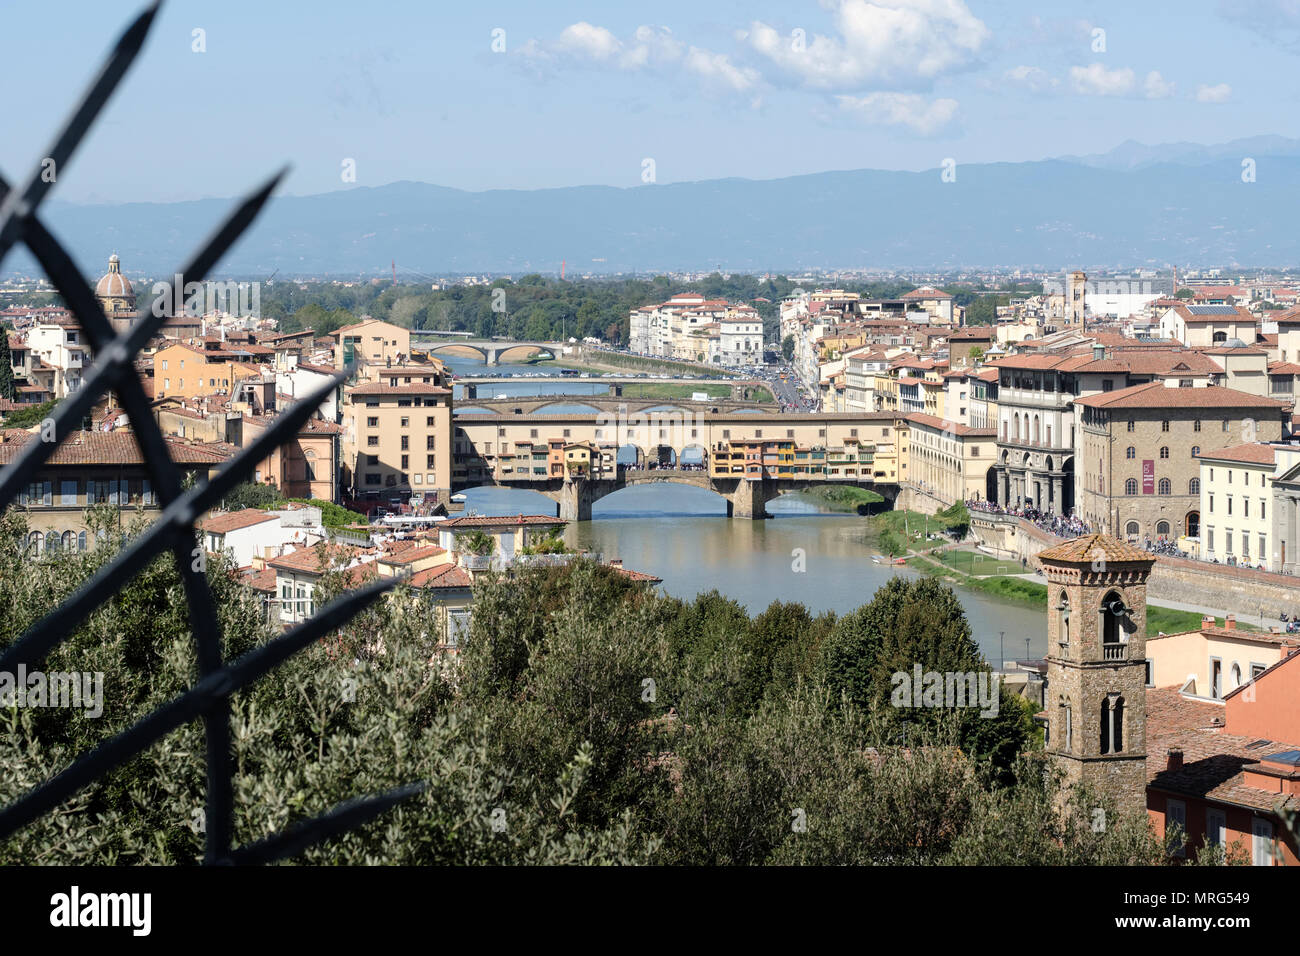 High viewpoint down the River Arno towards the Ponte Vecchio in the middle distance, Florence, Tuscany, Italy, Europe, Stock Photo